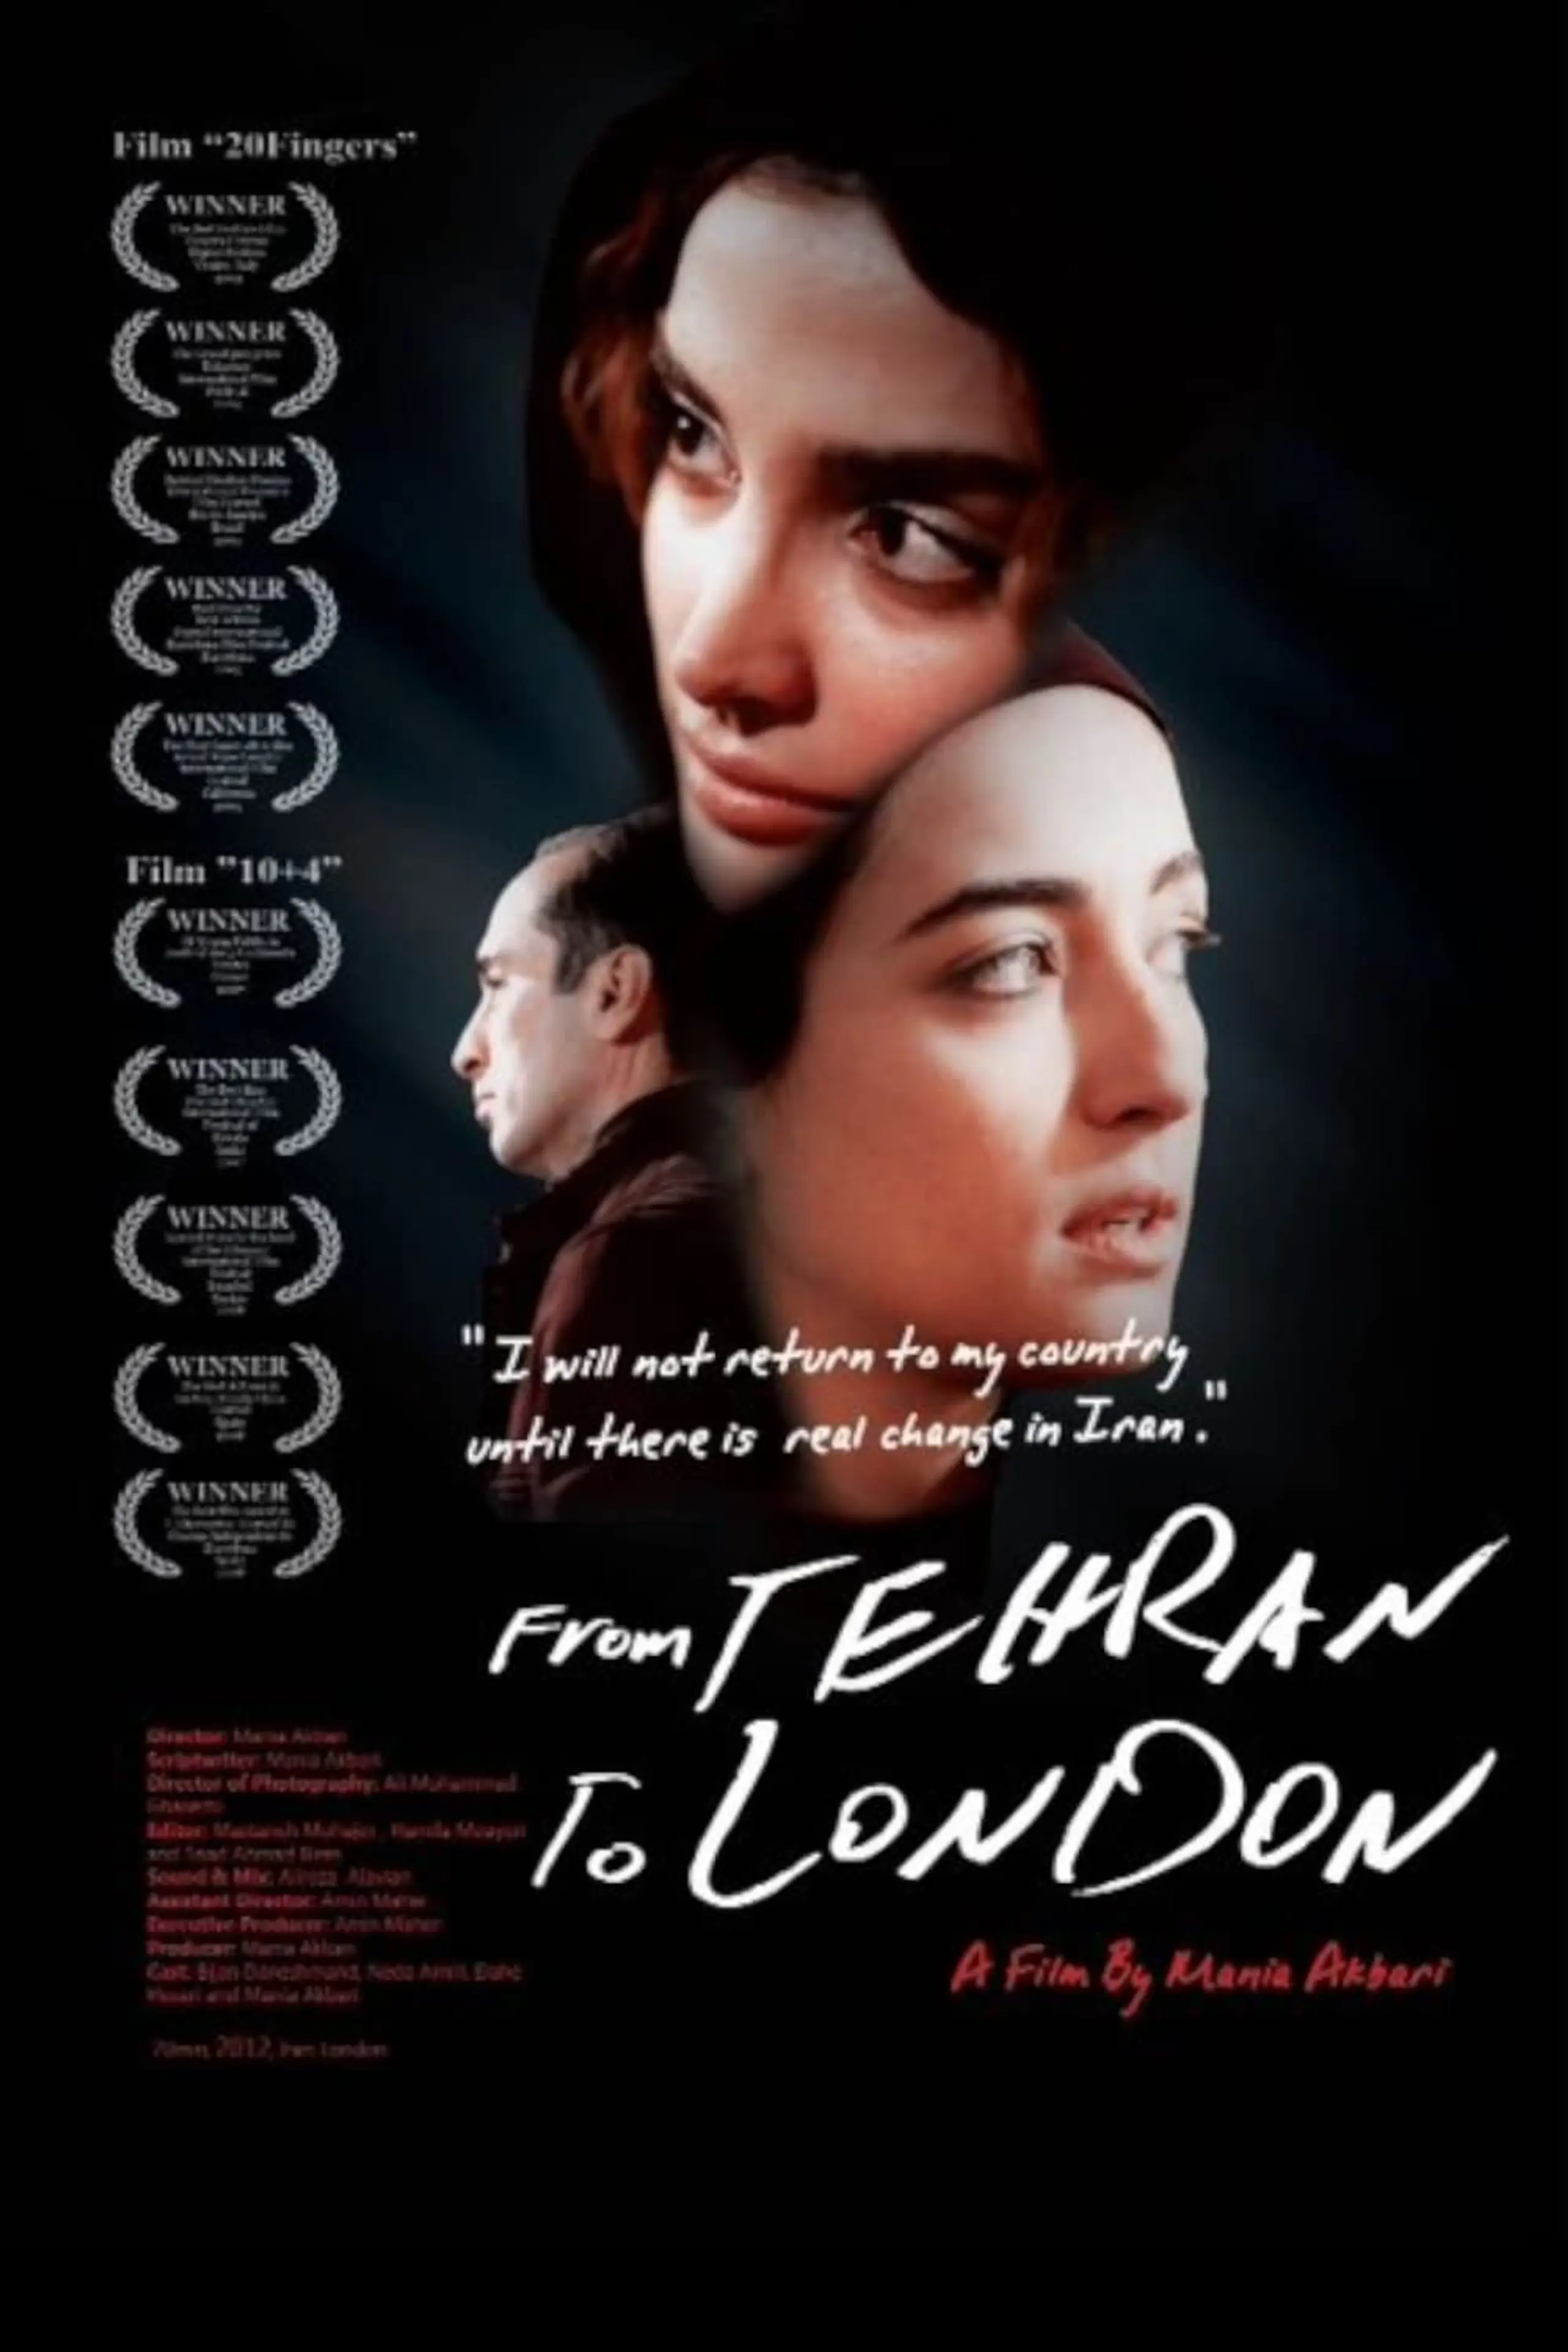 From Tehran to London